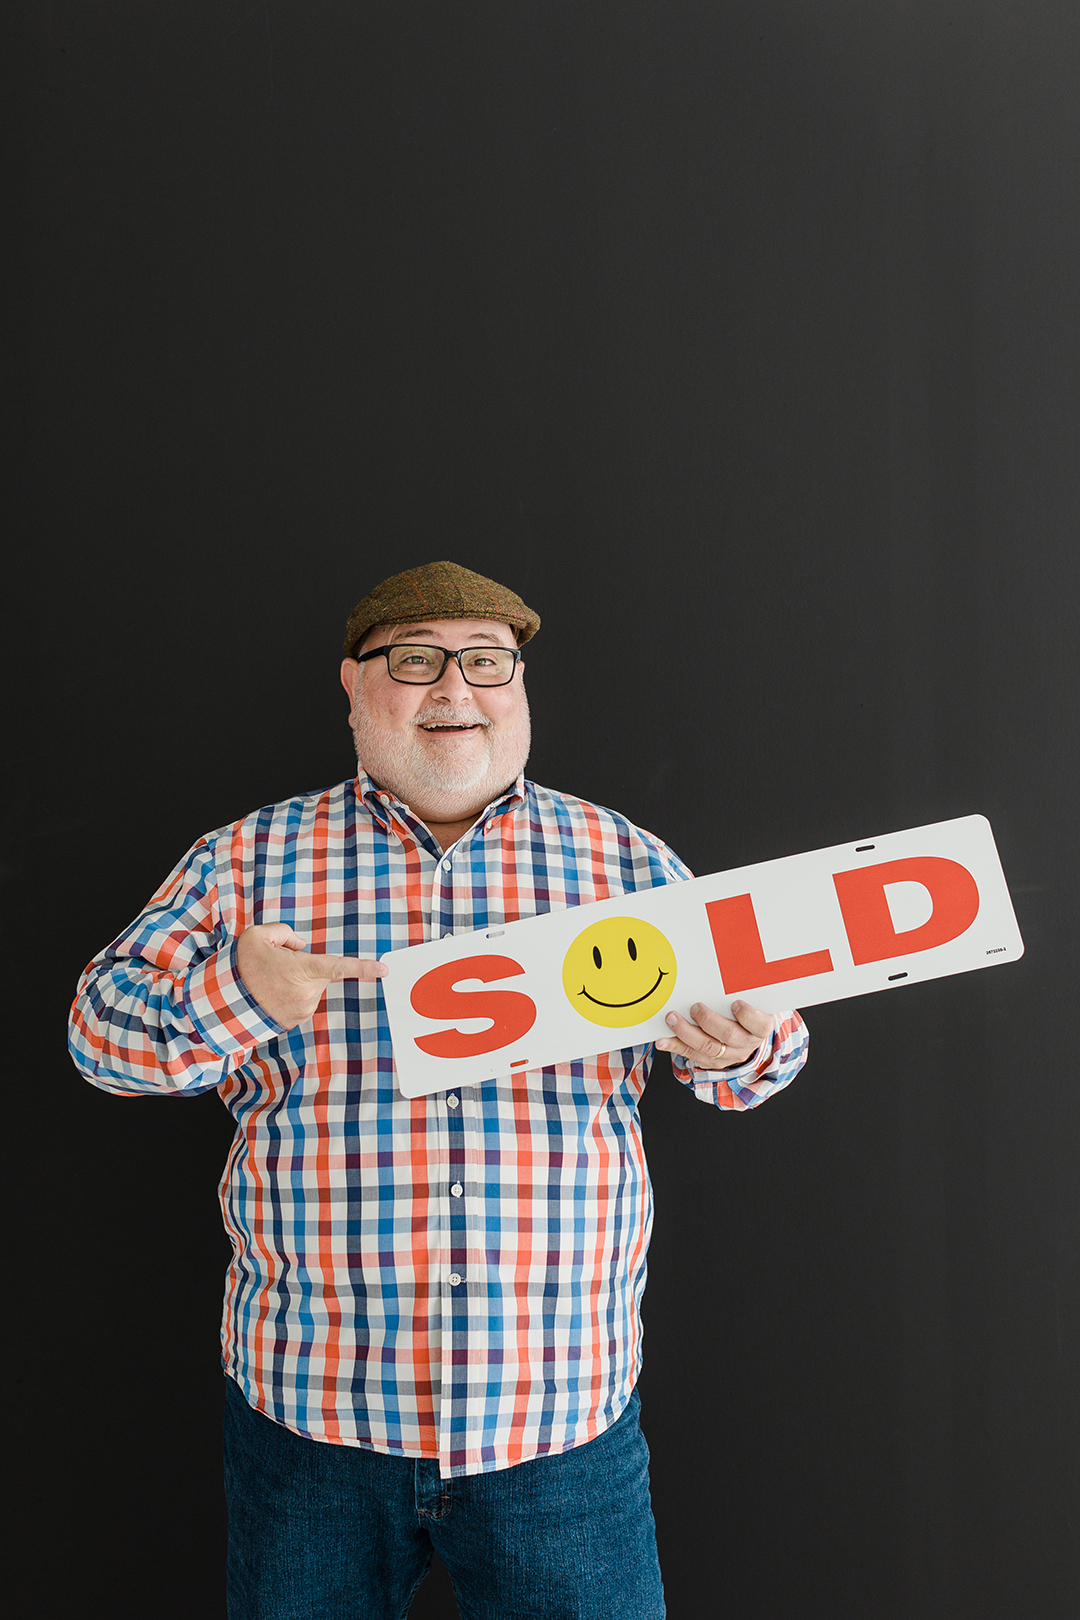 DFW Headshot Photographer; photo of a man in a blue and orange checkered shirt, brown hat, and glasses holding a sign reading "sold" and smiling in front of a black background.